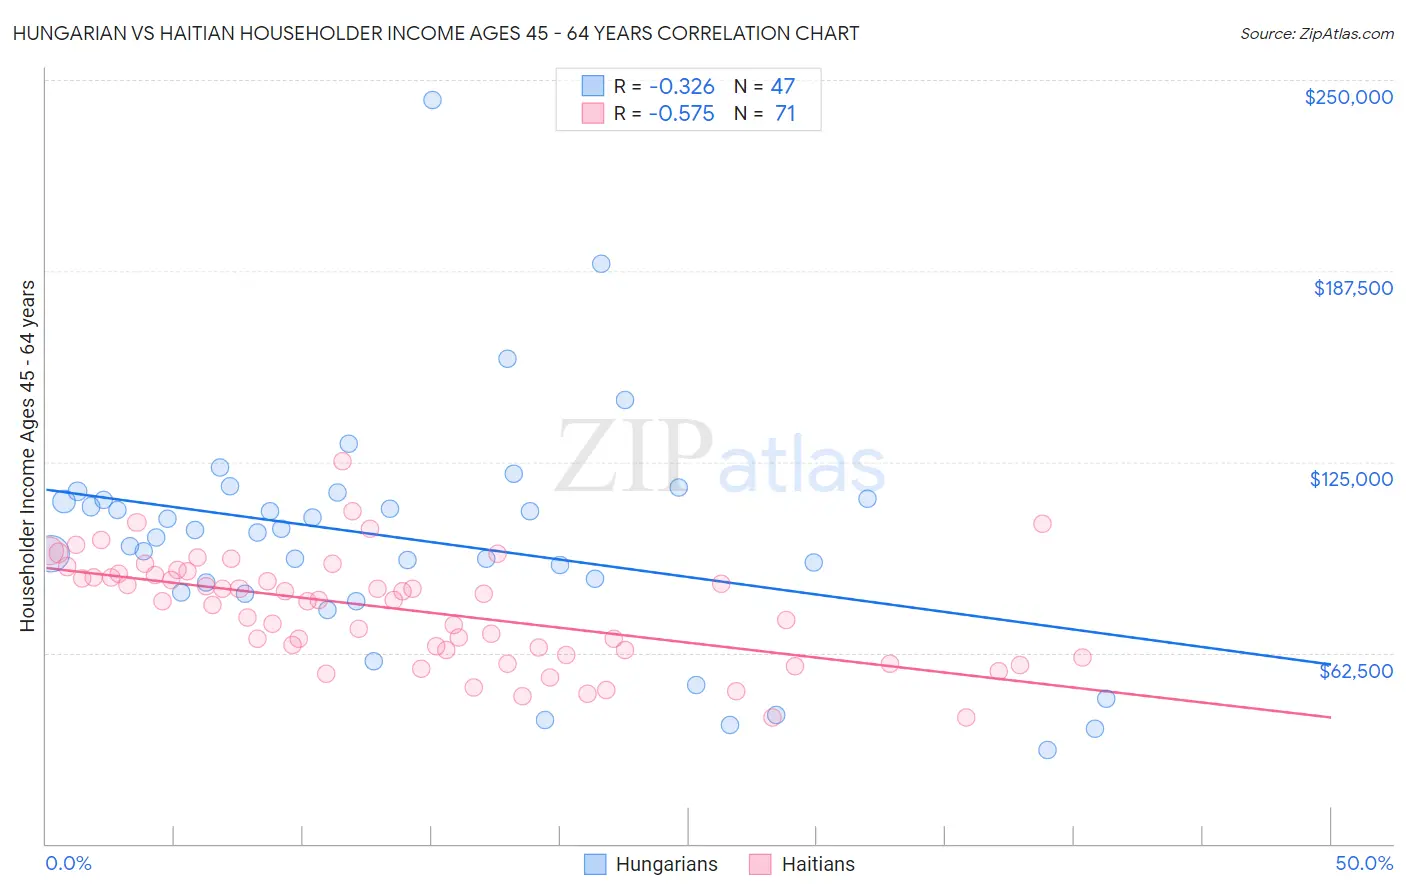 Hungarian vs Haitian Householder Income Ages 45 - 64 years